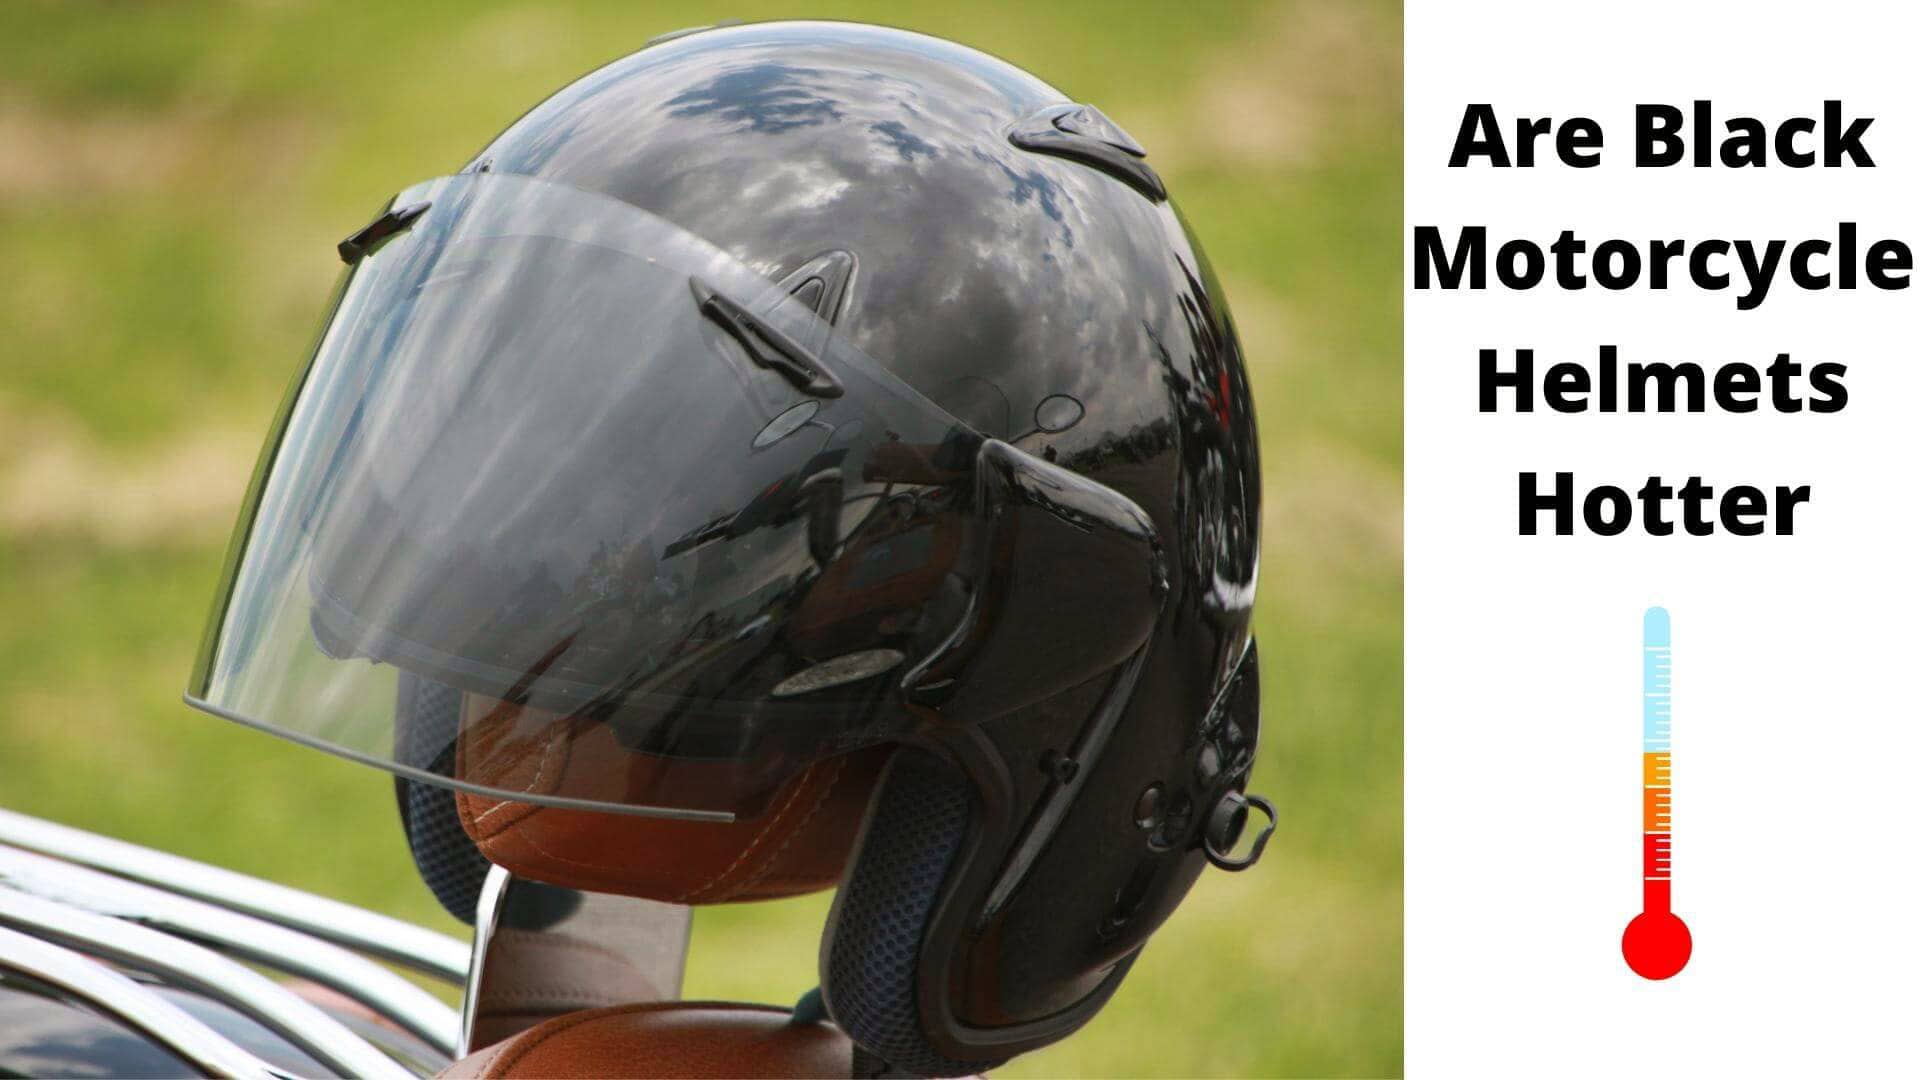 are black motorcycle helmets hotter?